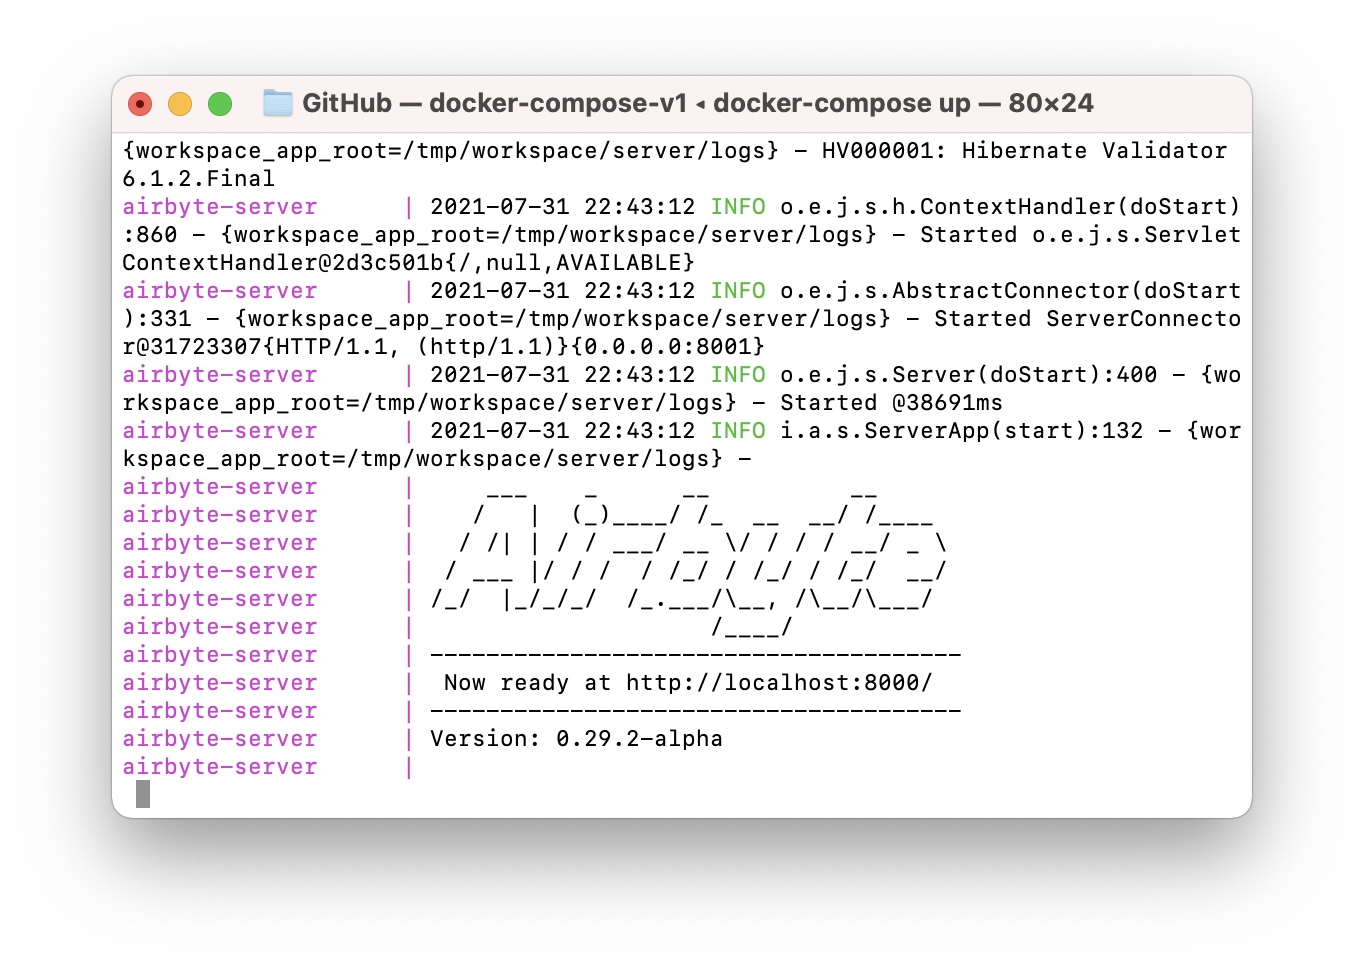 Installing Airbyte via the command line